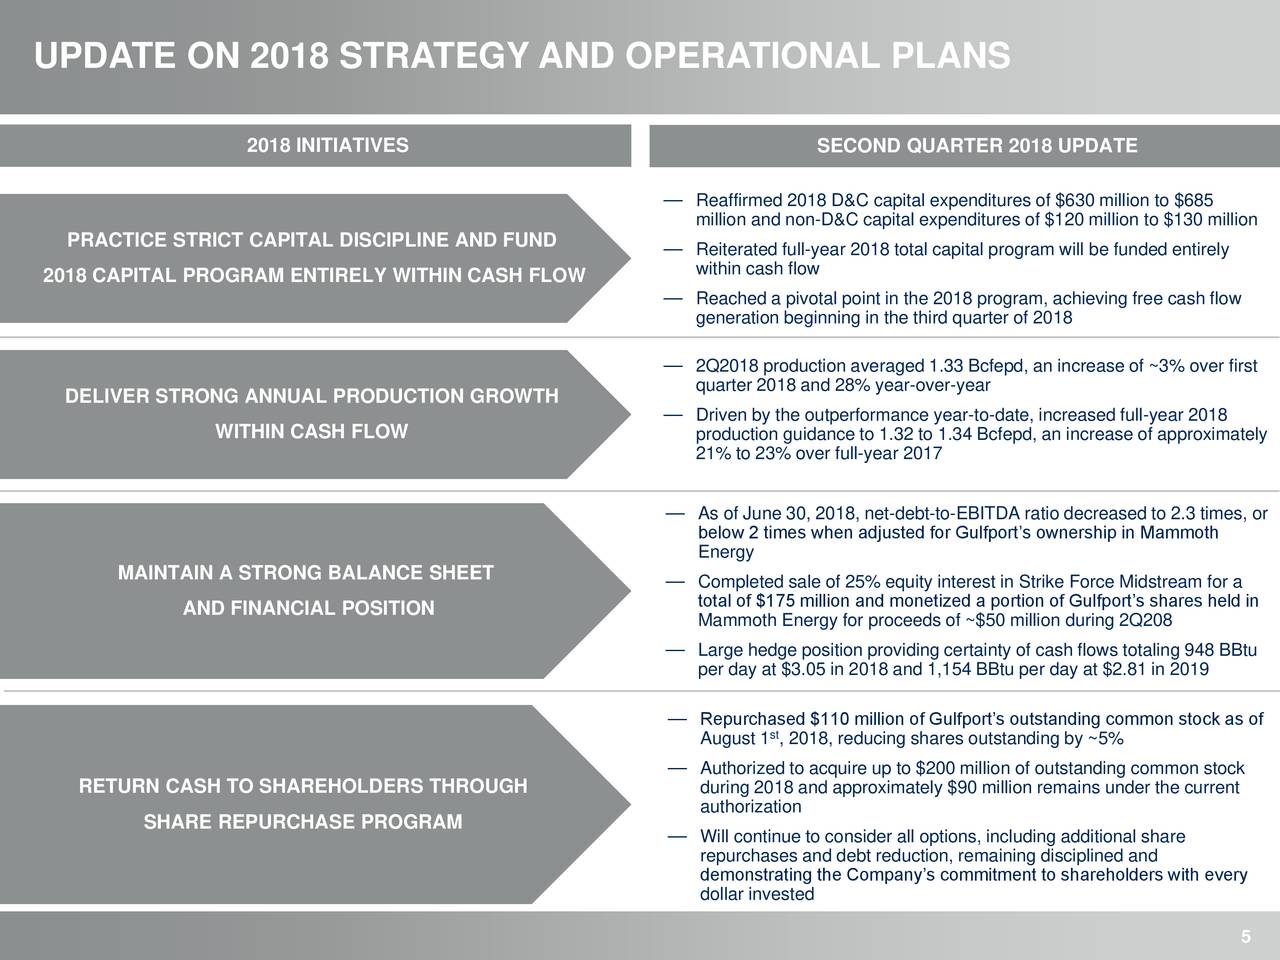 UPDATE ON 2018 STRATEGY AND OPERATIONAL PLANS